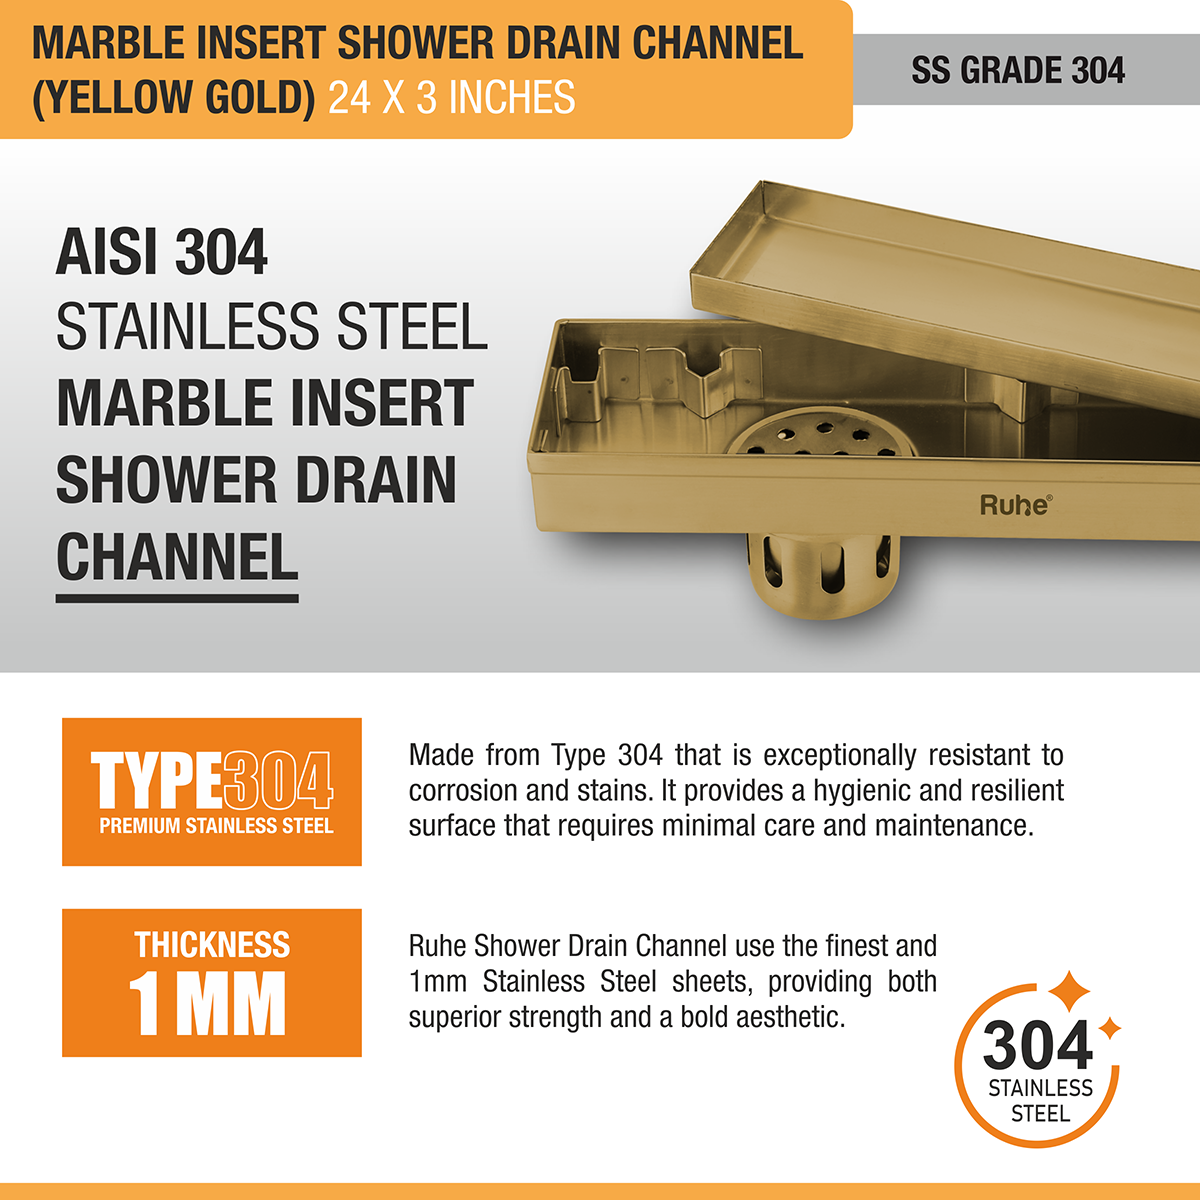 Marble Insert Shower Drain Channel (24 x 3 Inches) YELLOW GOLD PVD Coated stainless steel